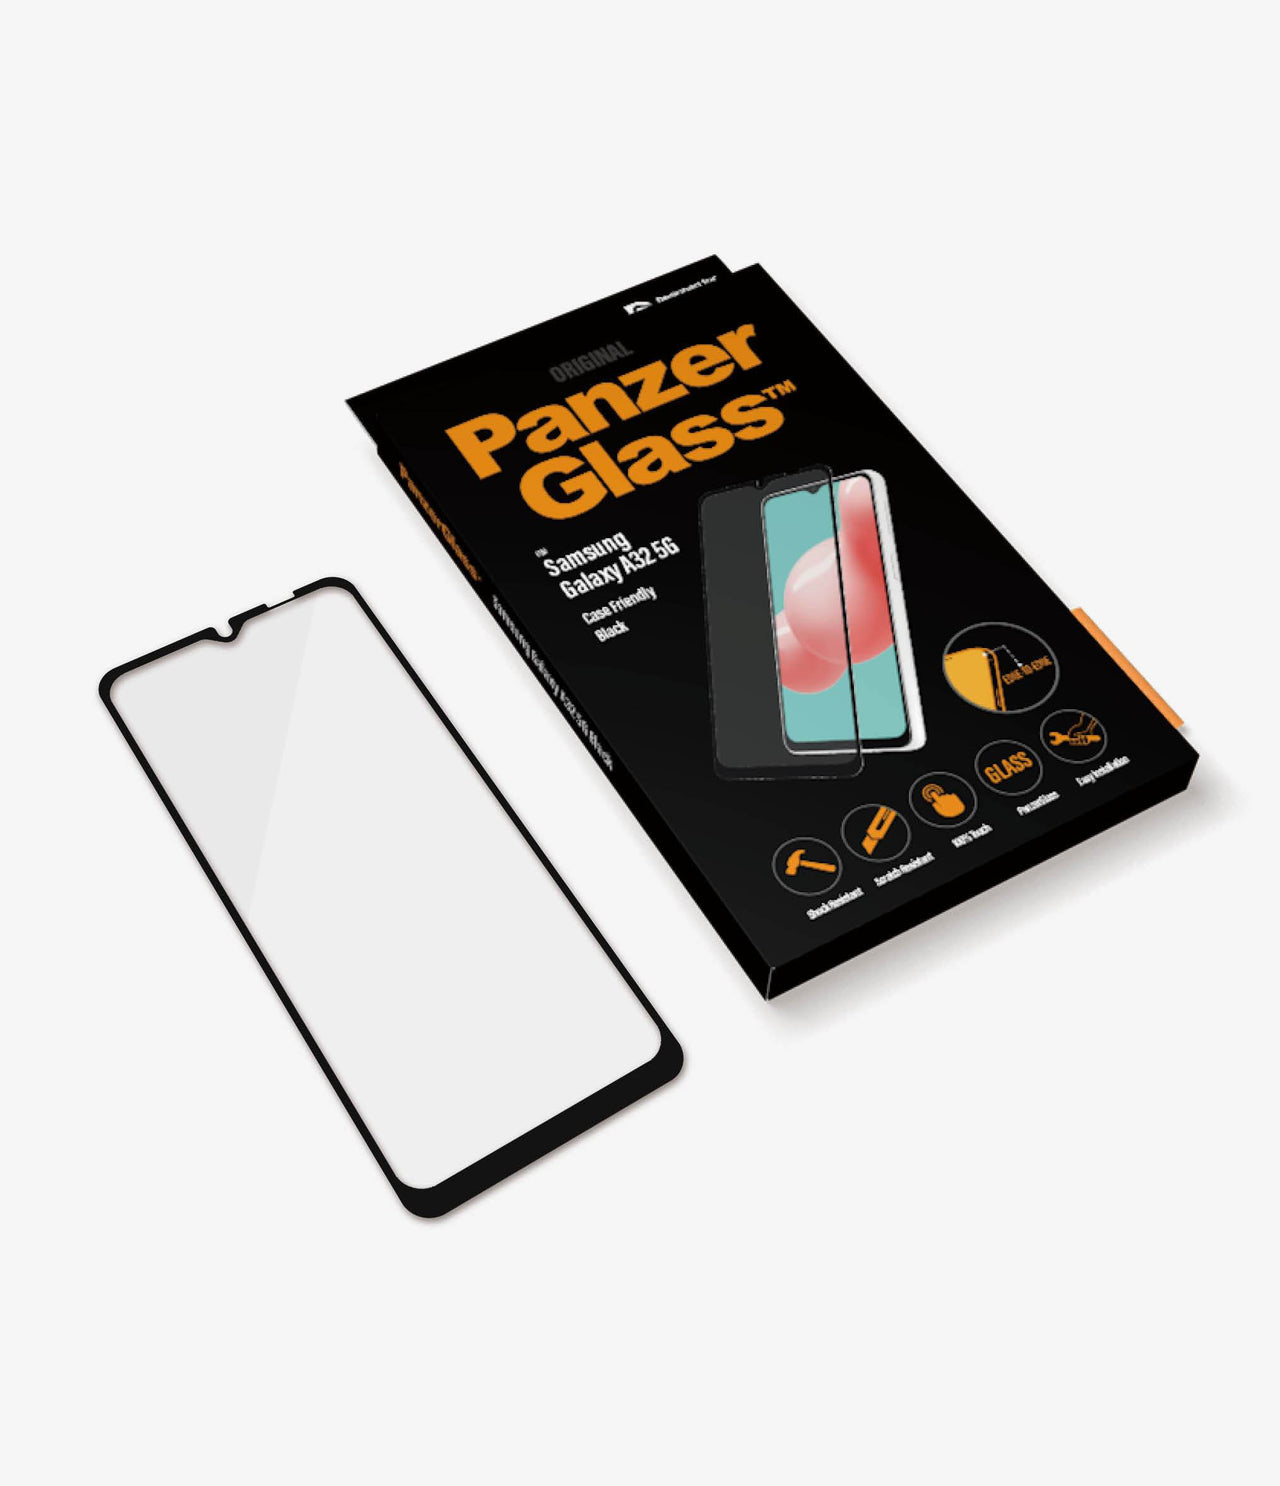 Panzer Glass Screen Protector for Samsung Galaxy A32 5G - Black